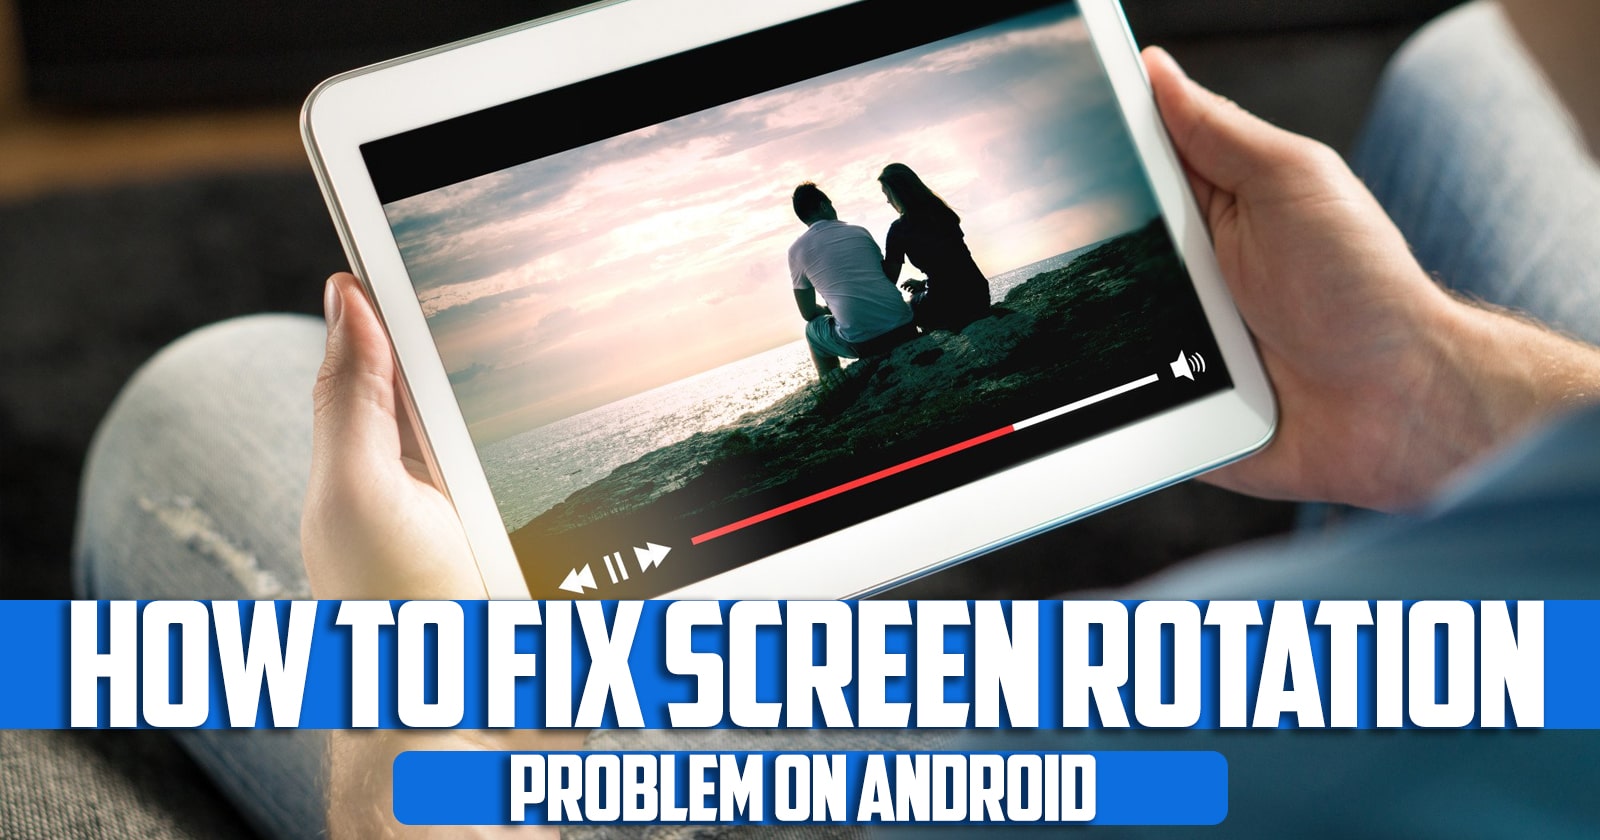 How to Fix Screen Rotation Problem on Android